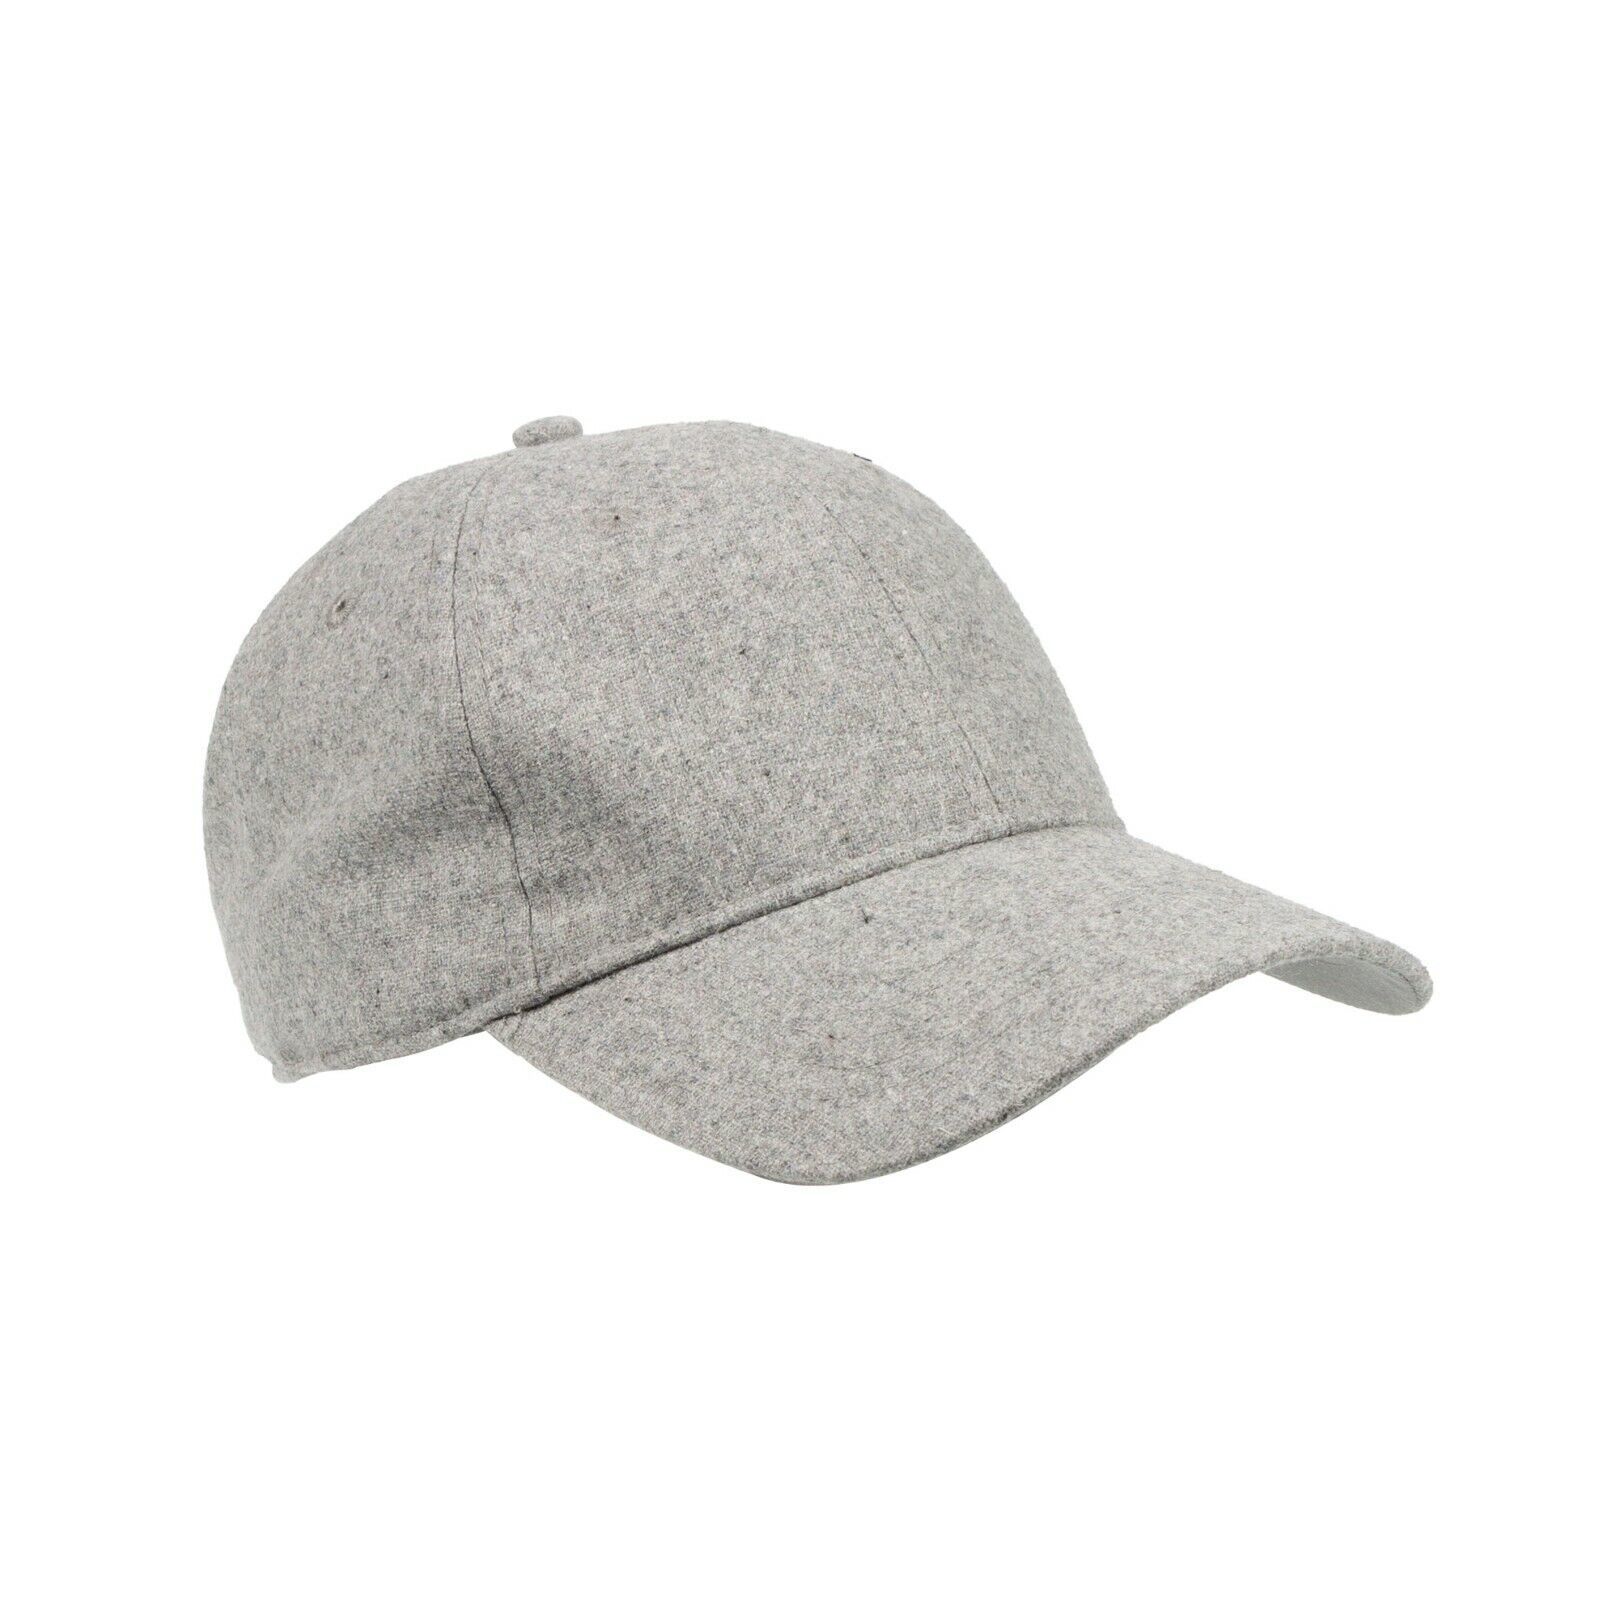 Primary image for Time And Tru Women's Flannel Baseball Cap Heathered Grey Color NEW